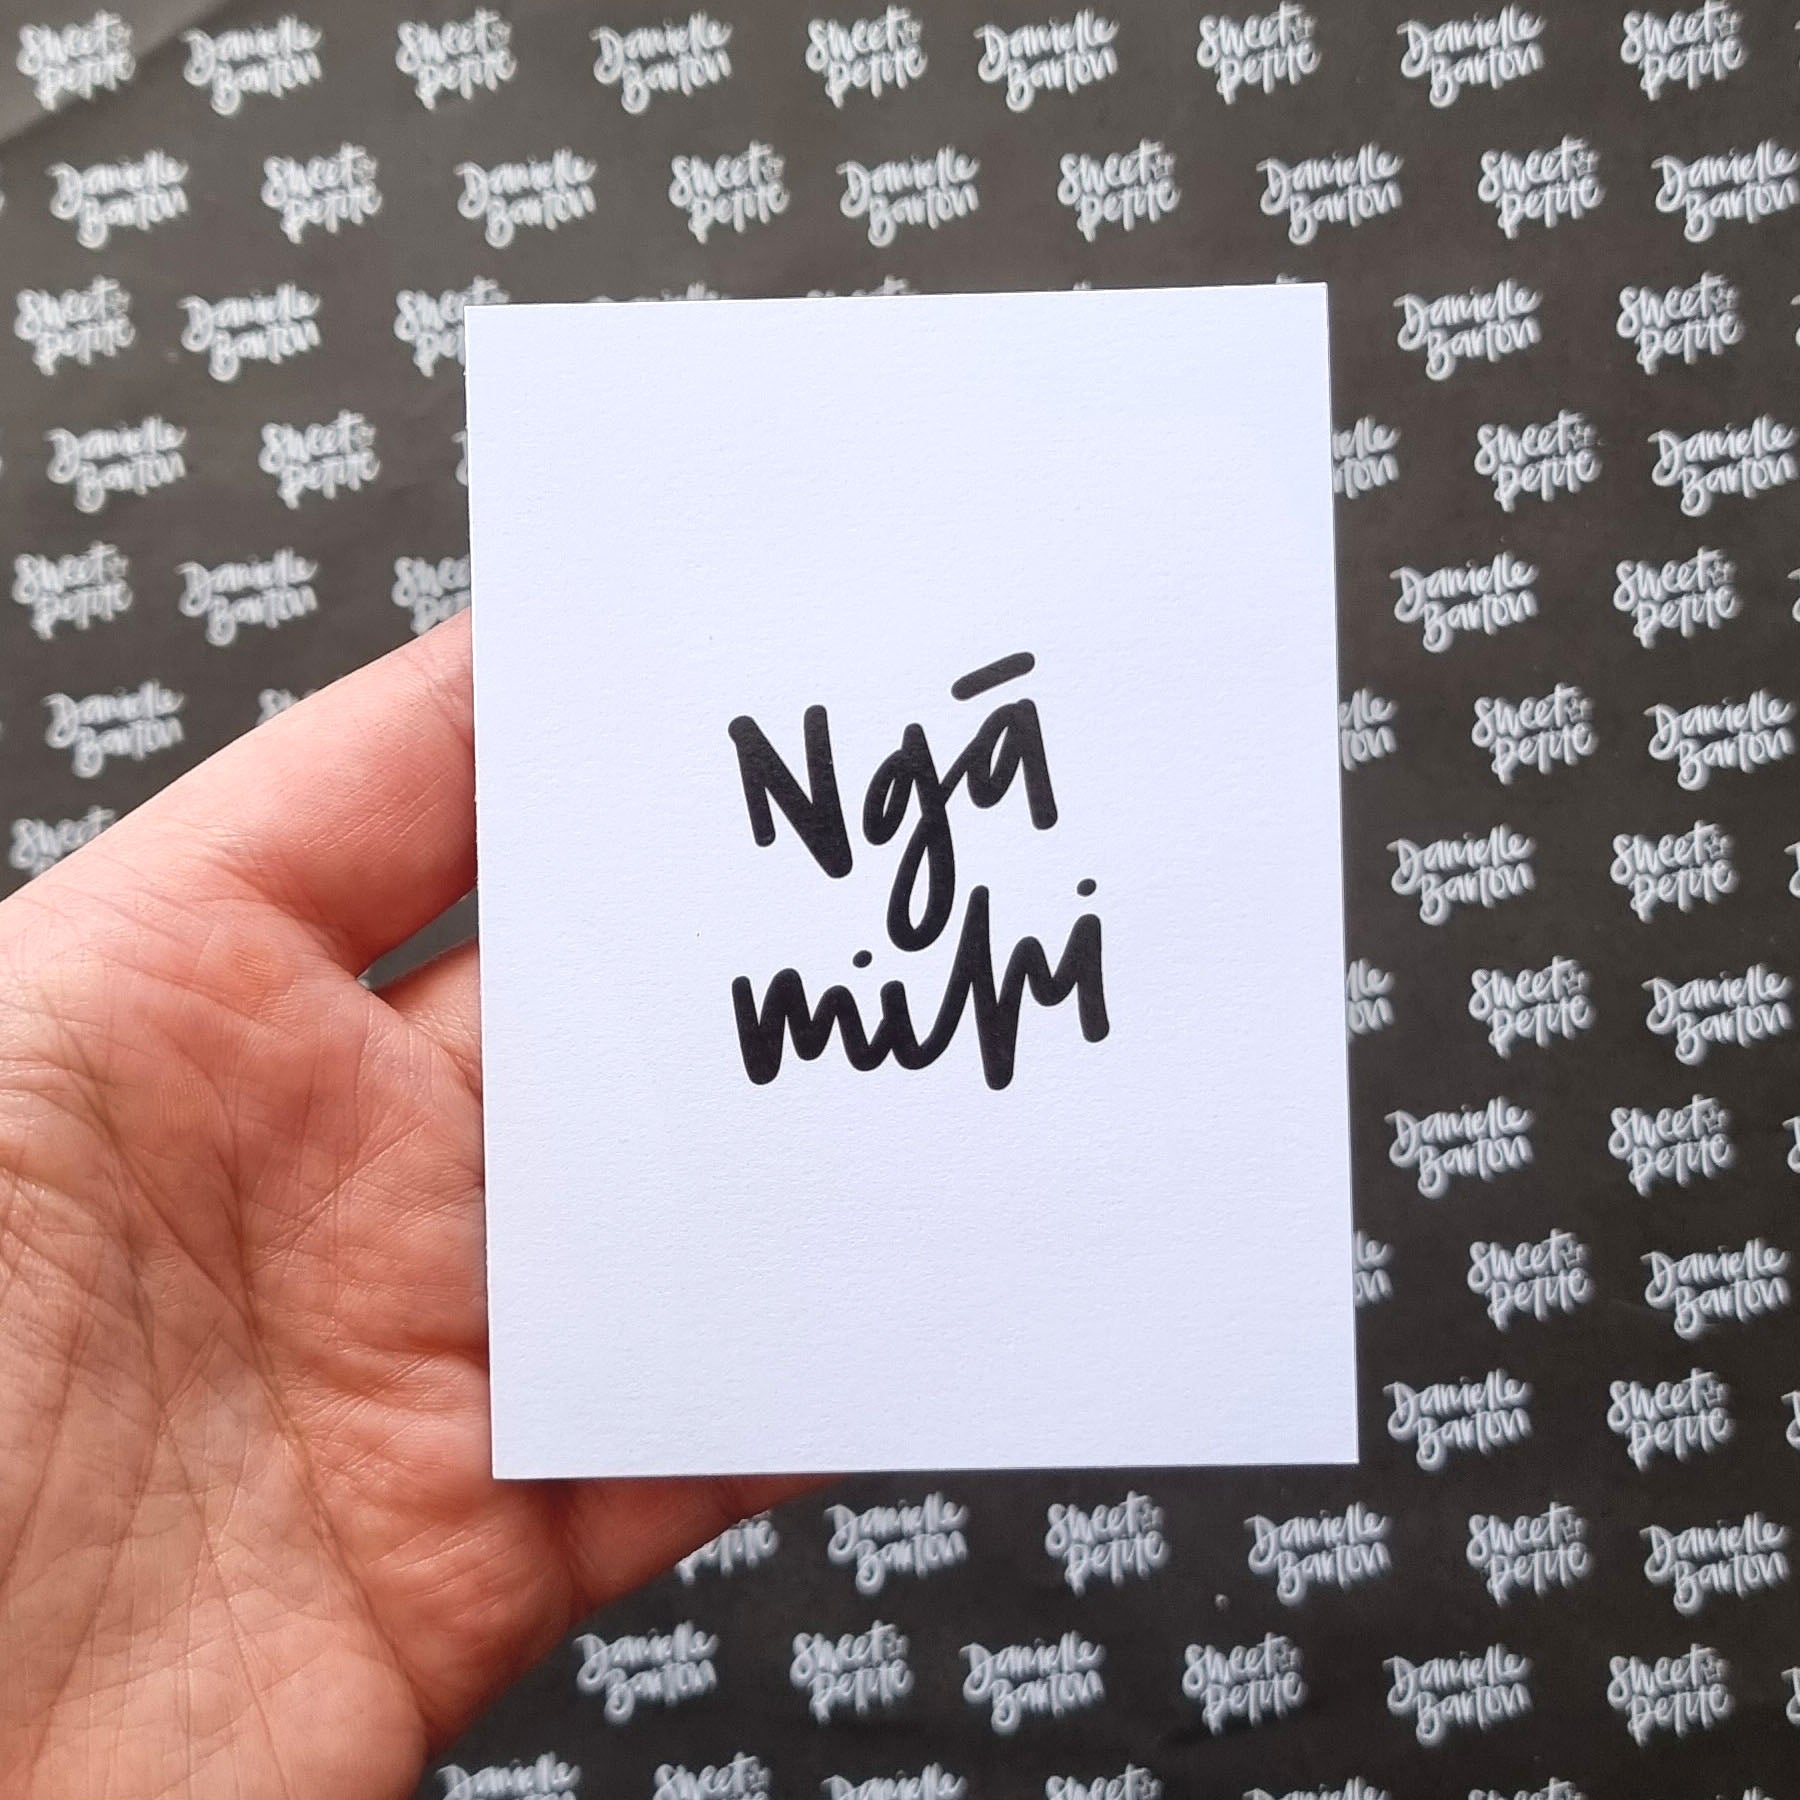 A7 Business Thank You Cards | Nga Mihi | by Sweet Petite